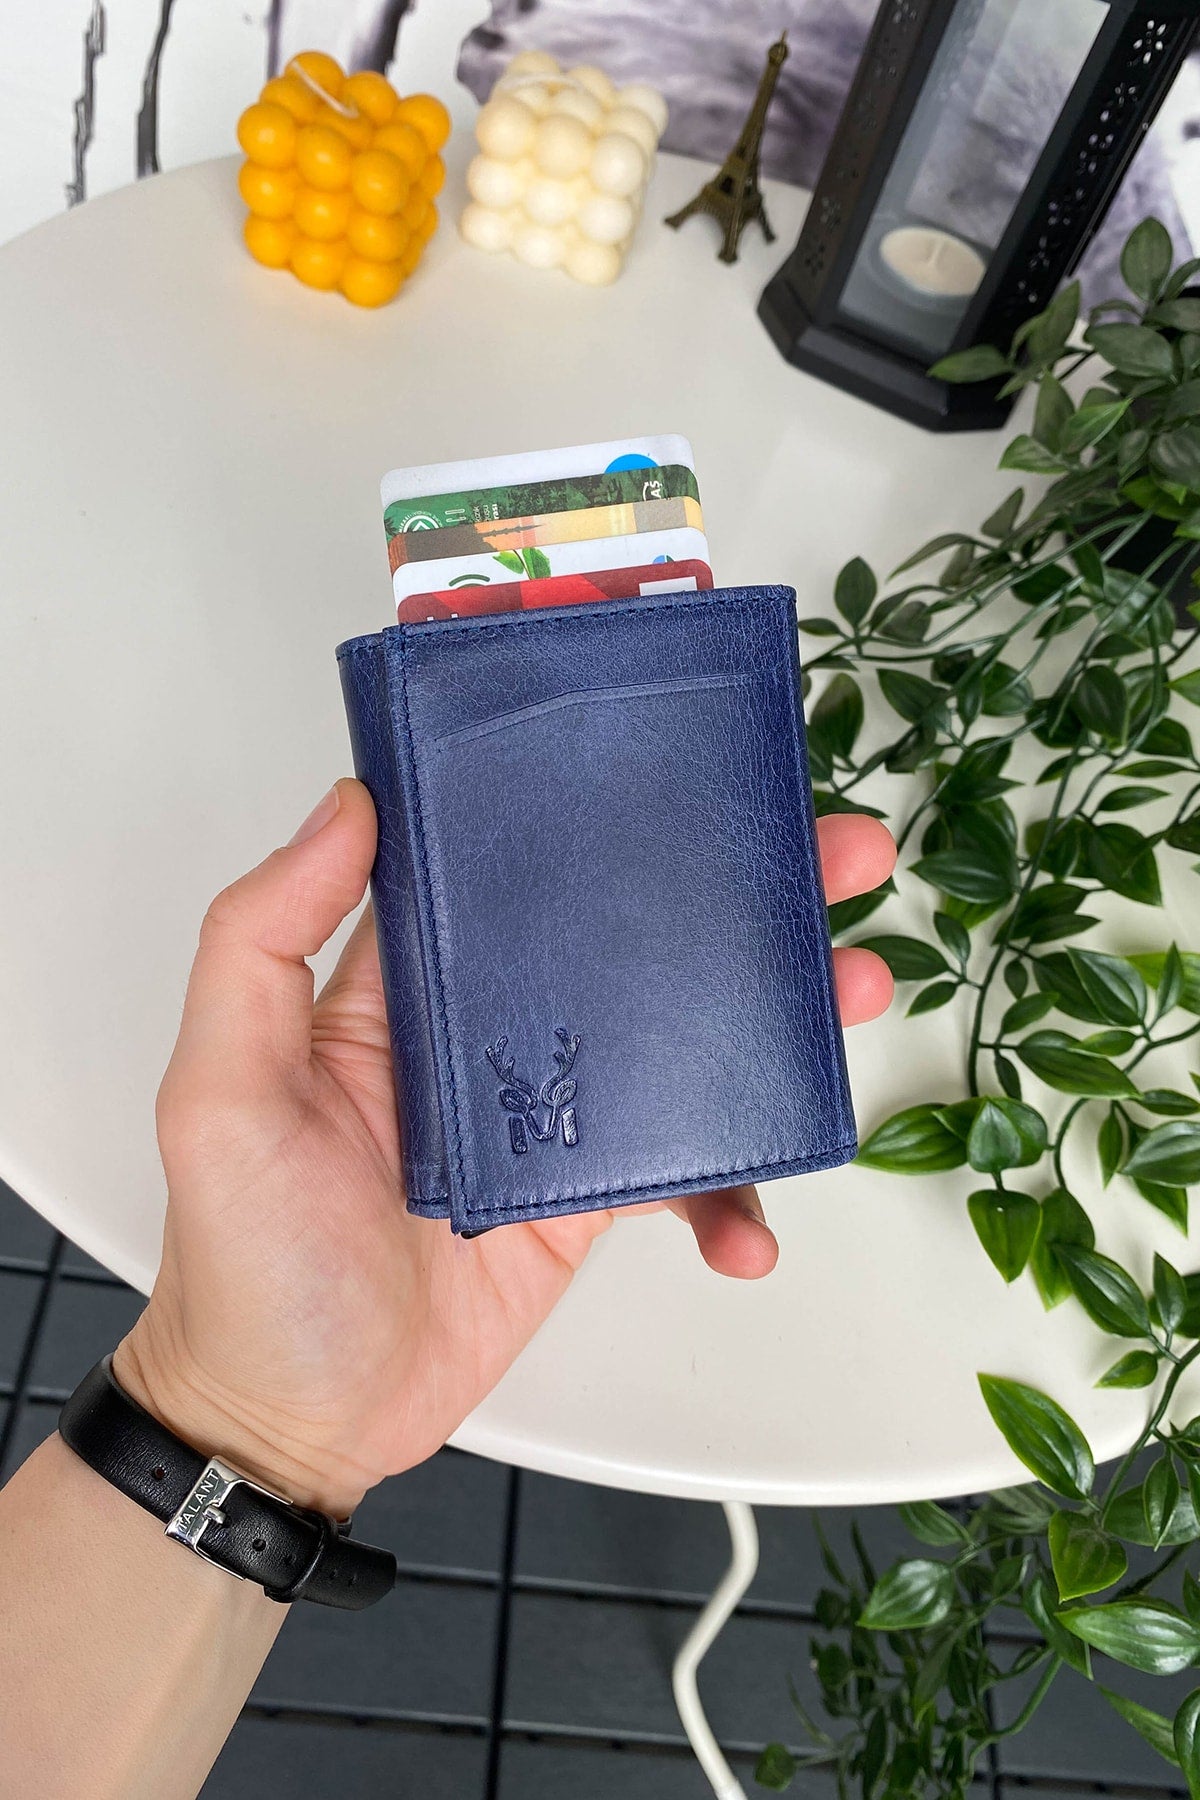 Pescol - Genuine Leather Smart Card Holder / Wallet with Rfid Protection Mechanism, High Level of Craftsmanship